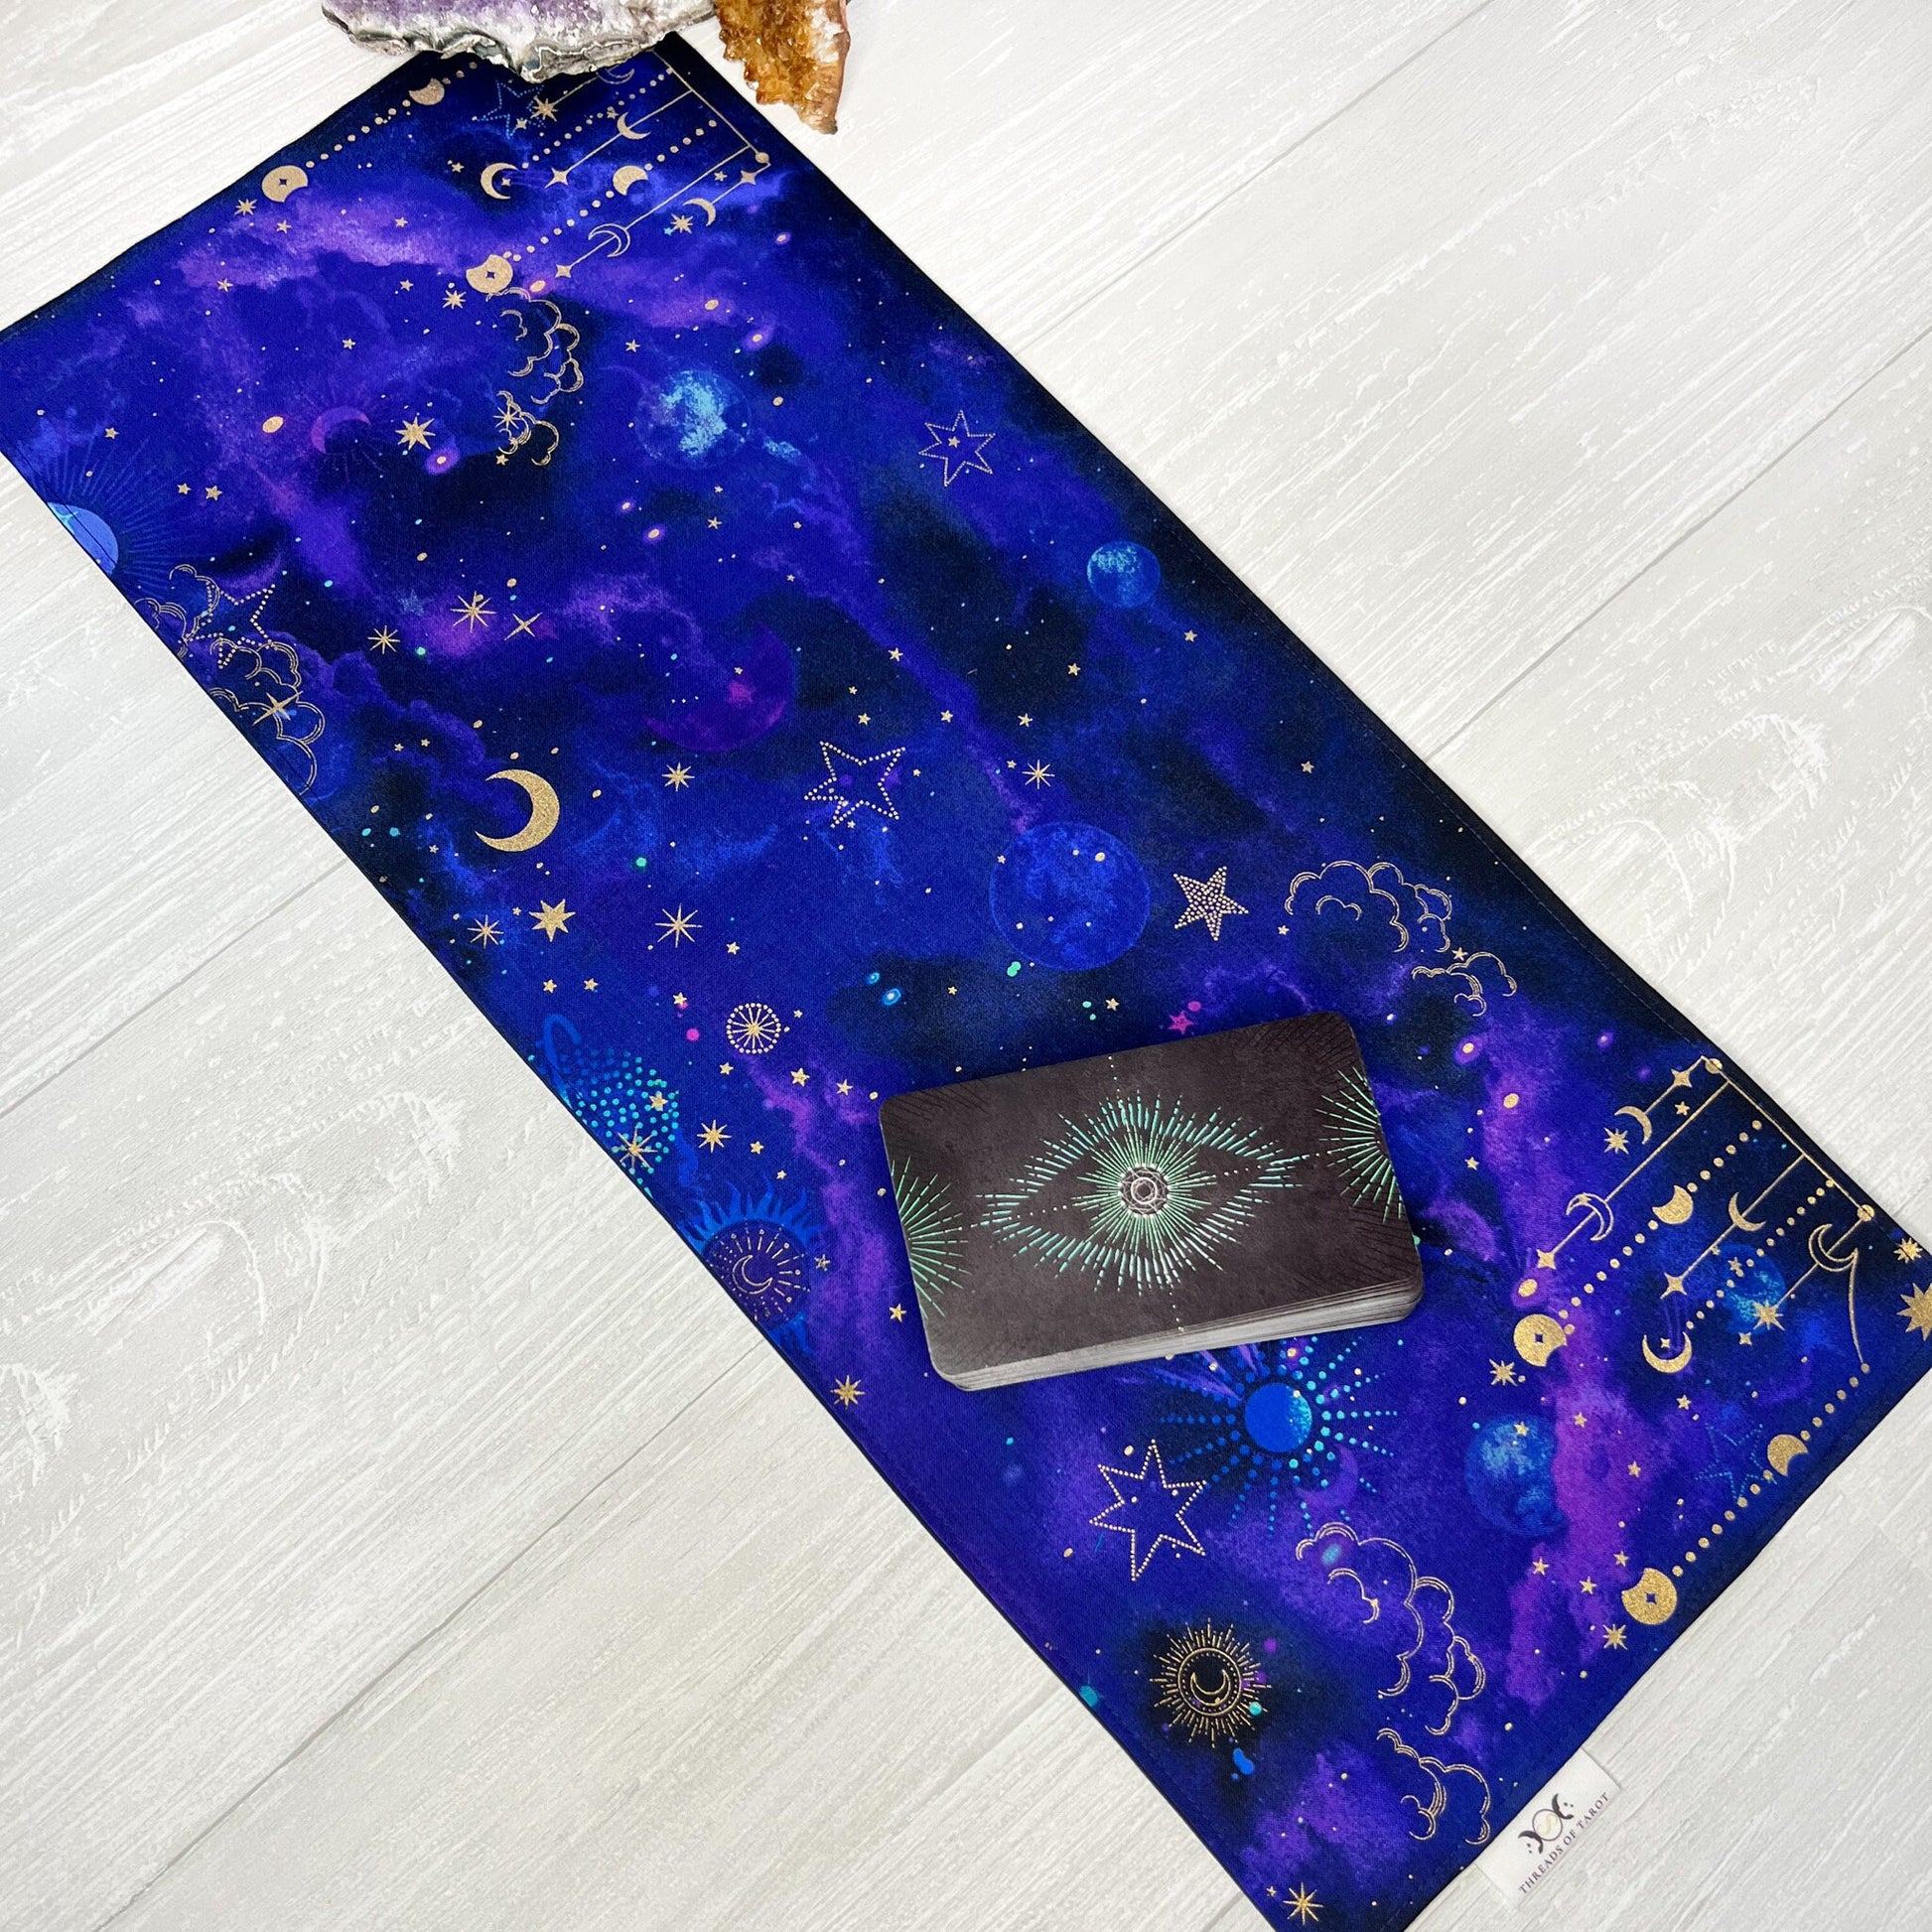 Celestial Altar Cloth, Rectangle Tarot Reading Cloth, Ritual Cloth, Rune Casting, Tarot Supplies, Witchy Gift Supplies, Divination Tools